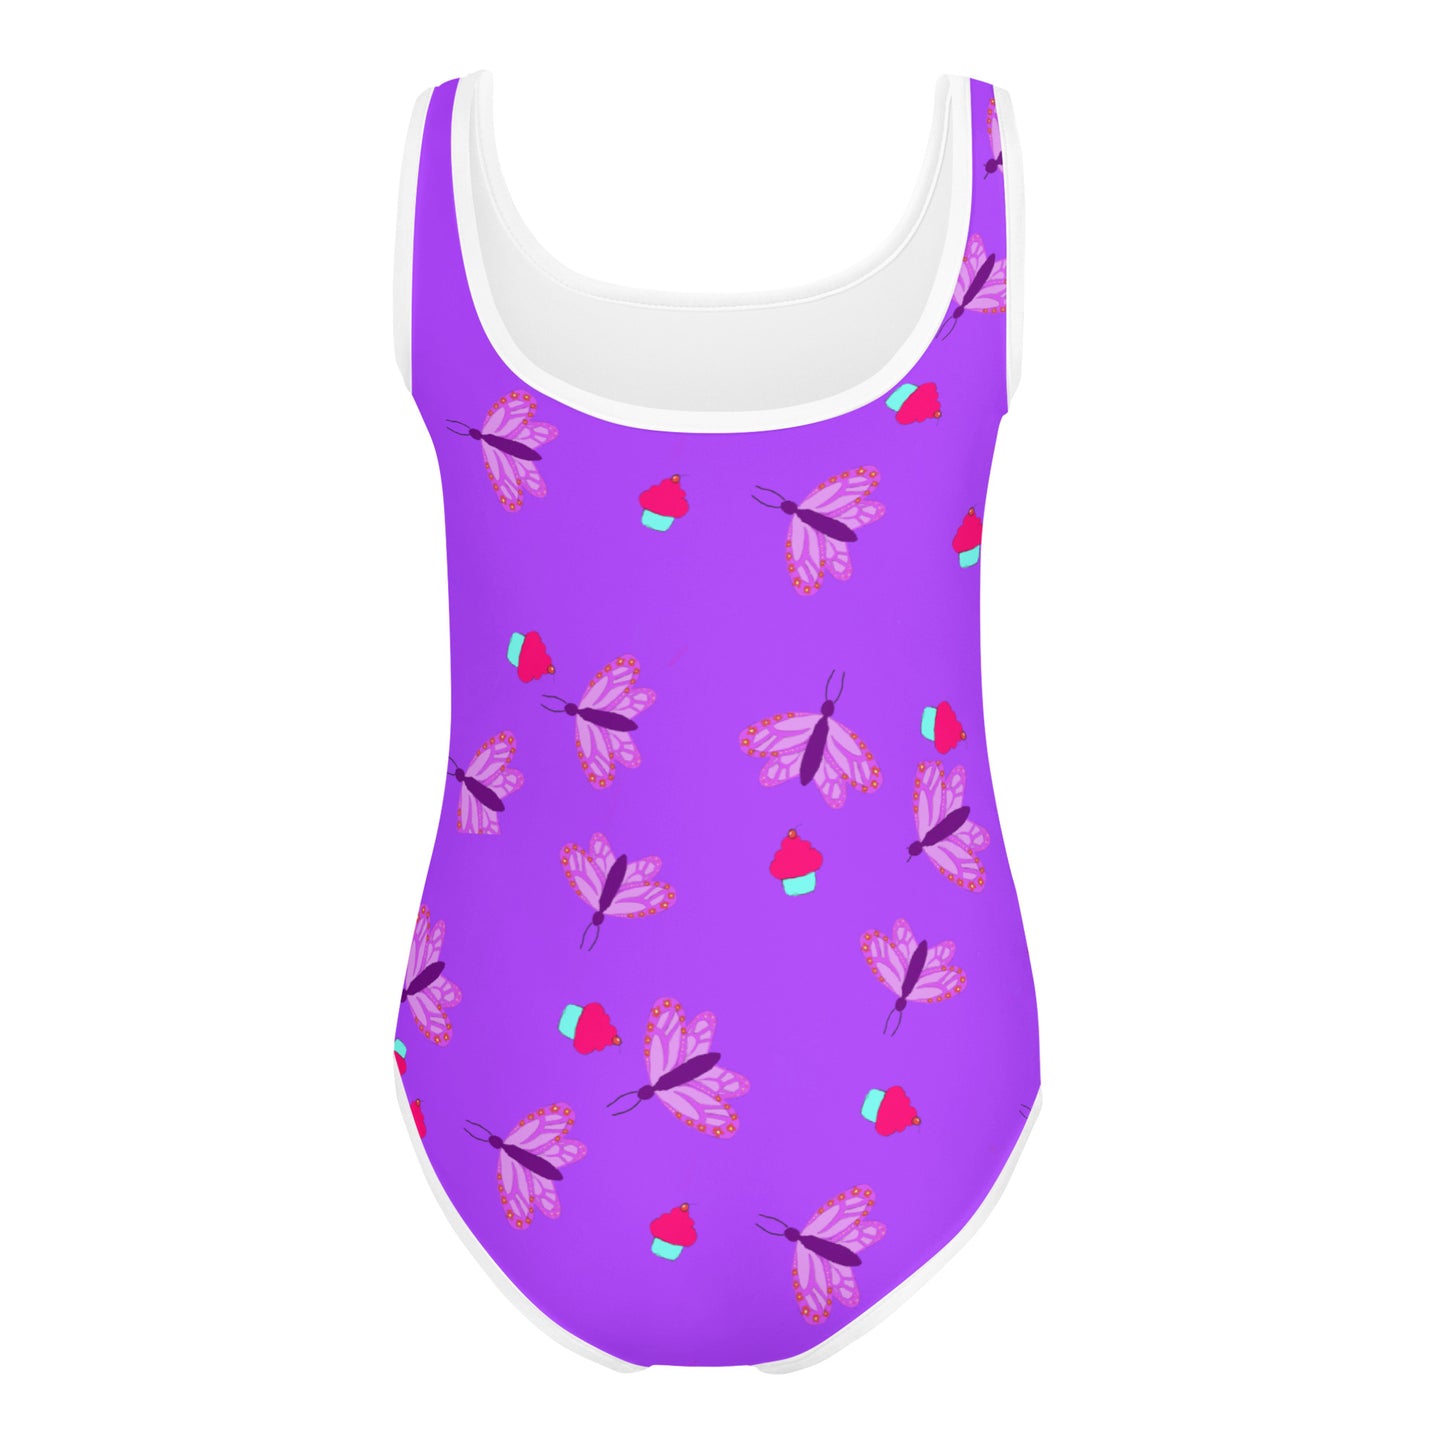 Girls' Athletic Swimsuit One Piece Purple with Butterflies and Cupcakes (Size 2T-7) FREE SHIPPING